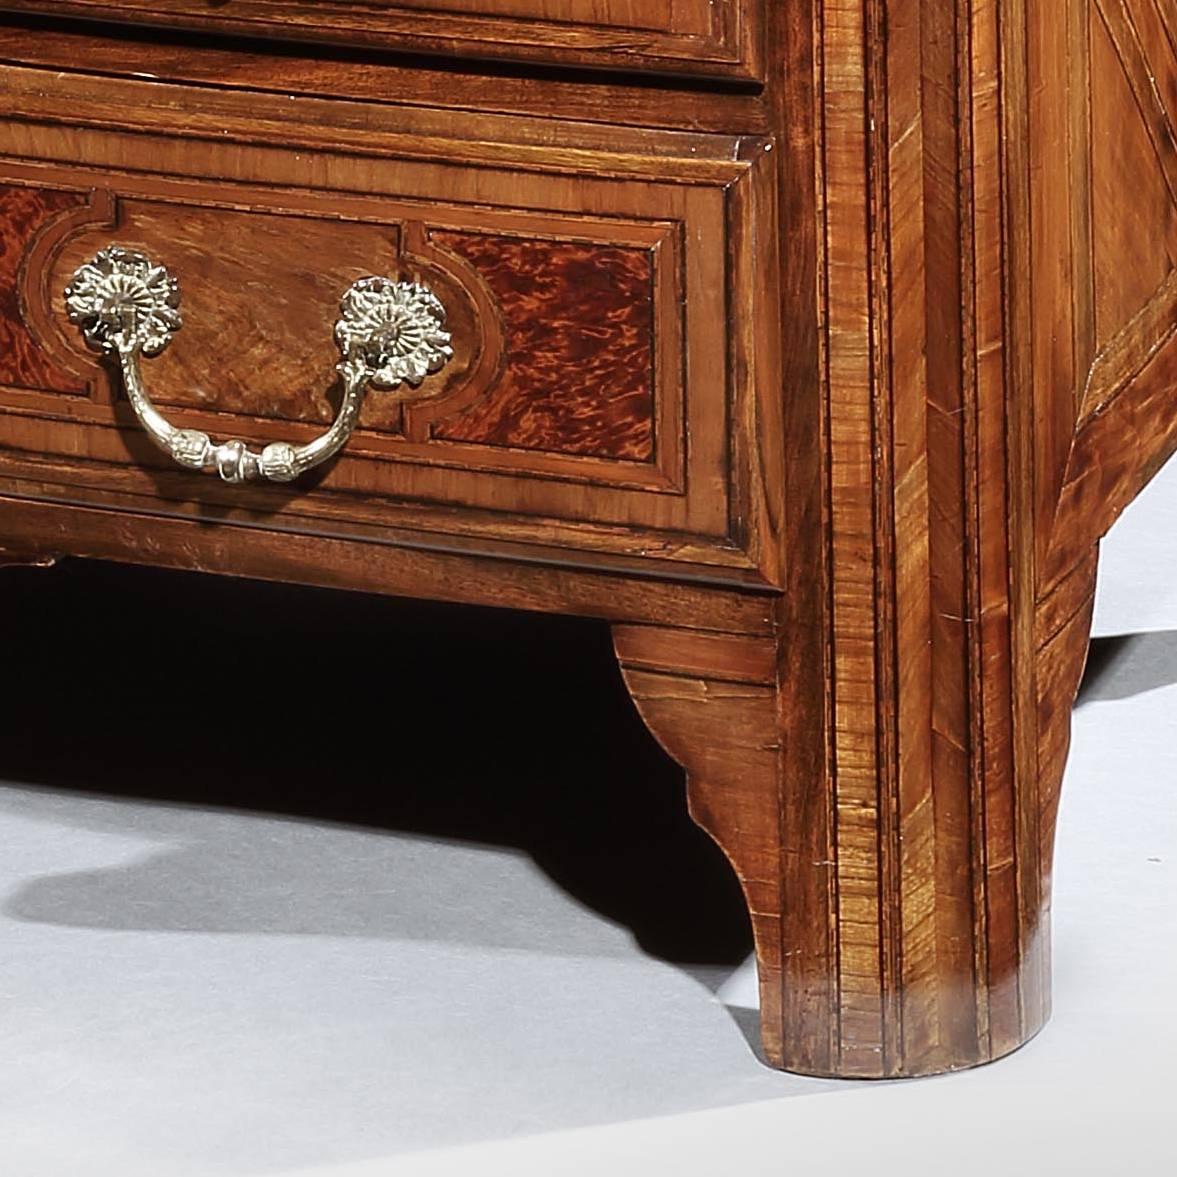 A fine late 17th century walnut commode, with panels of burr yew wood to the drawer fronts, the marquetry top inlaid with a Maltese star, all supported on raised and bracket feet.